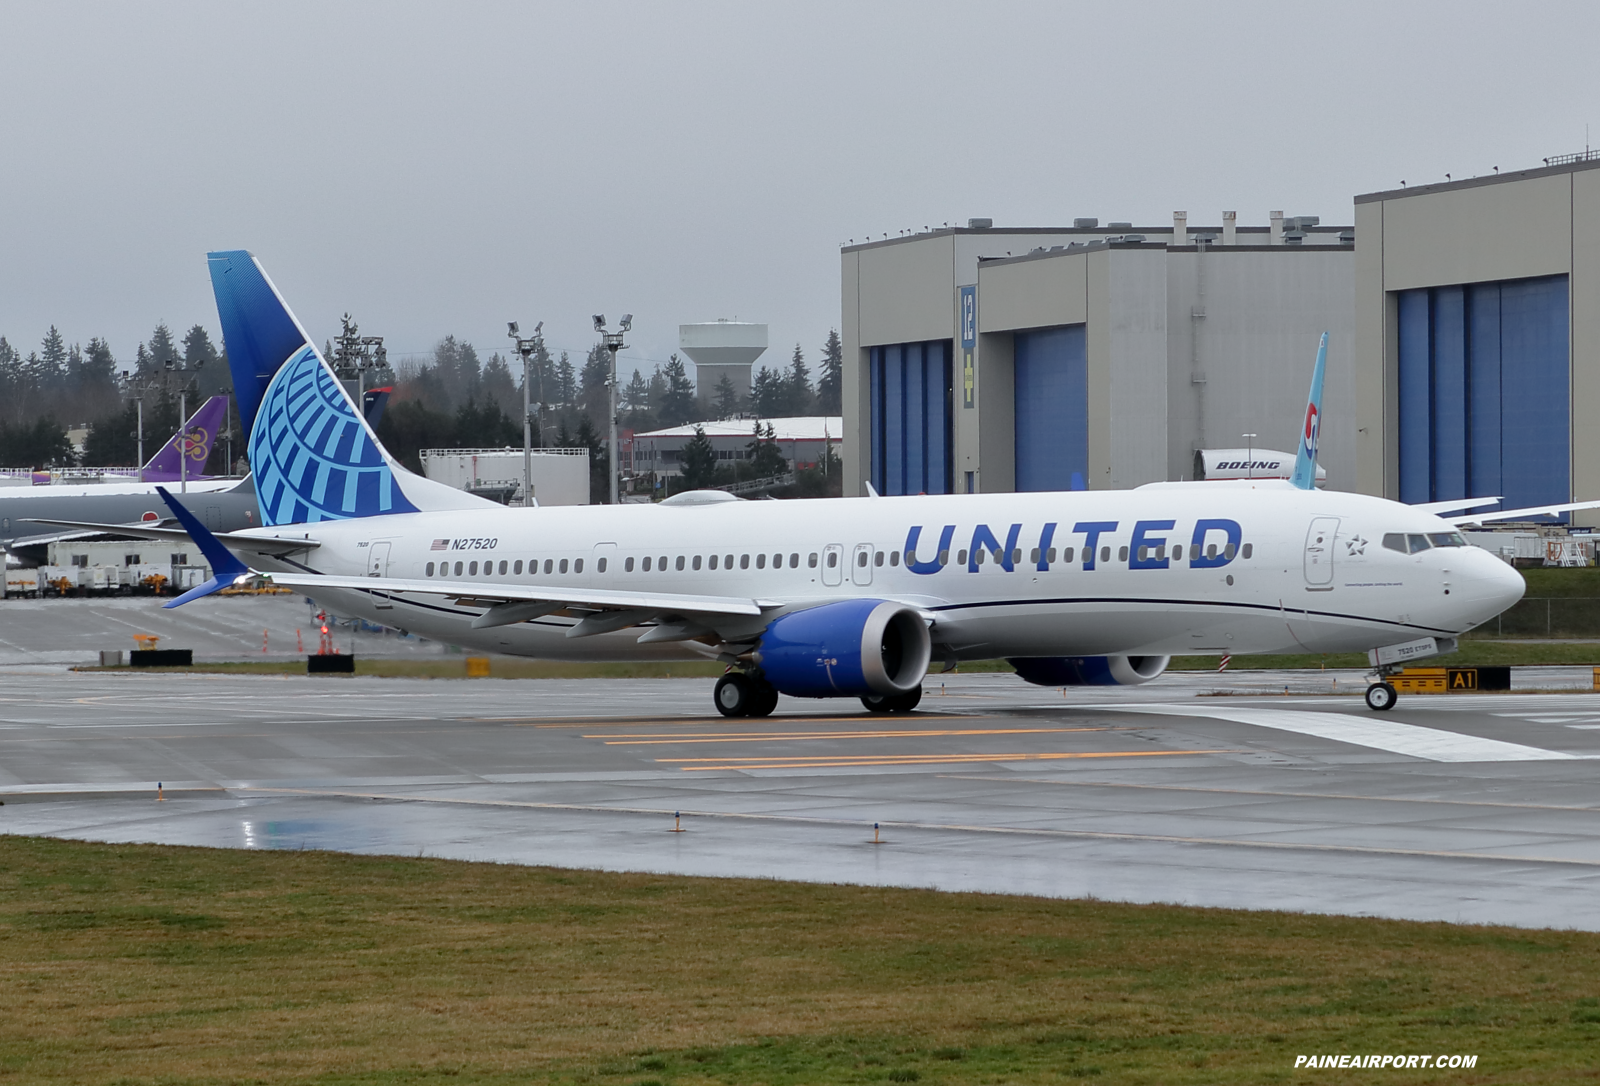 United Airlines 737 N27520 at KPAE Paine Field